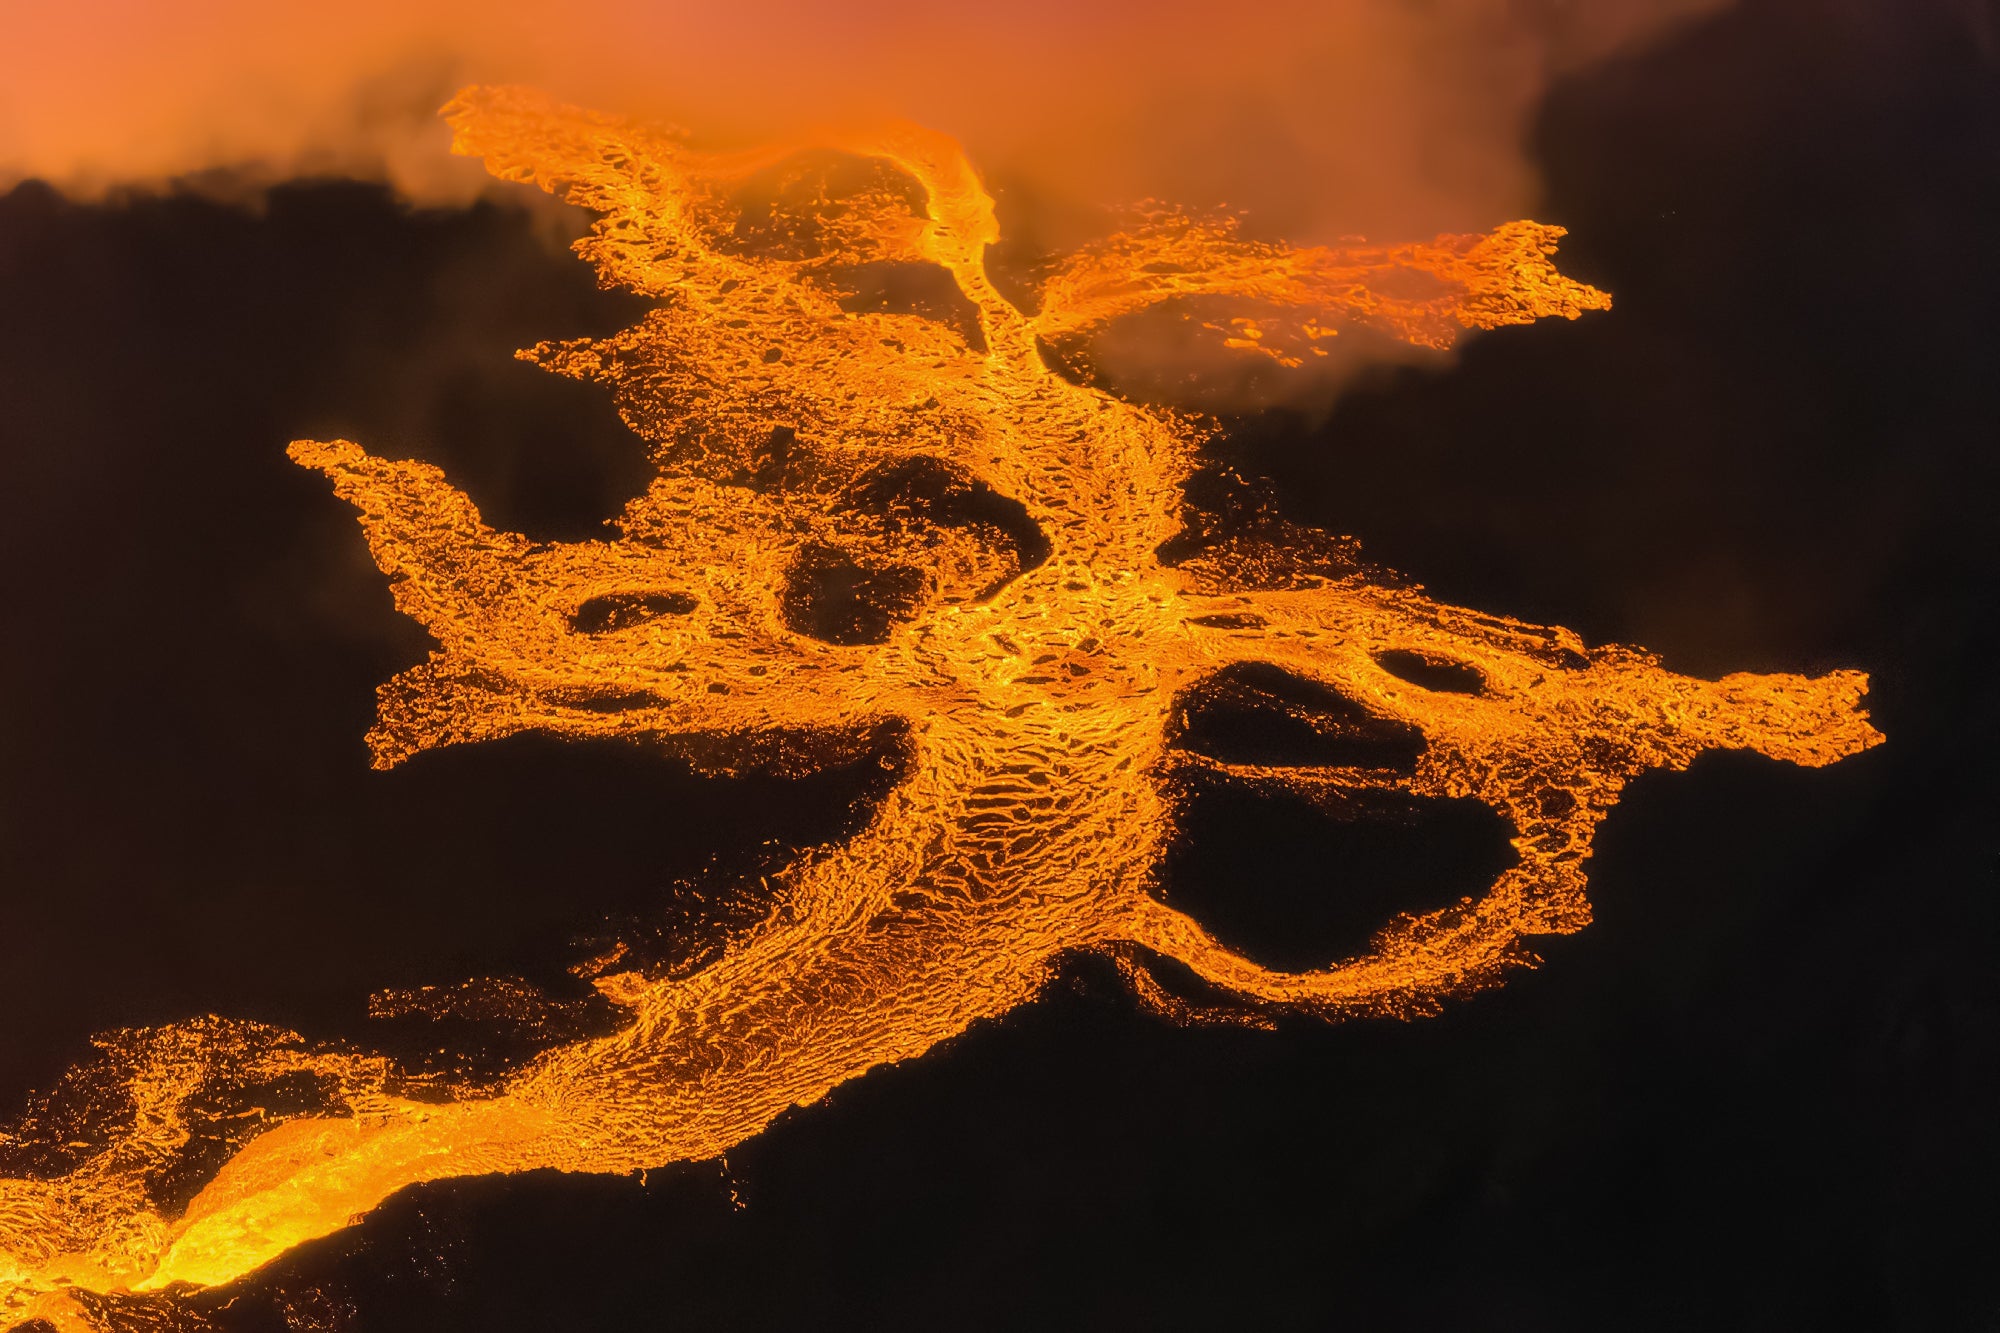 Volcano Dragon featured opacity image